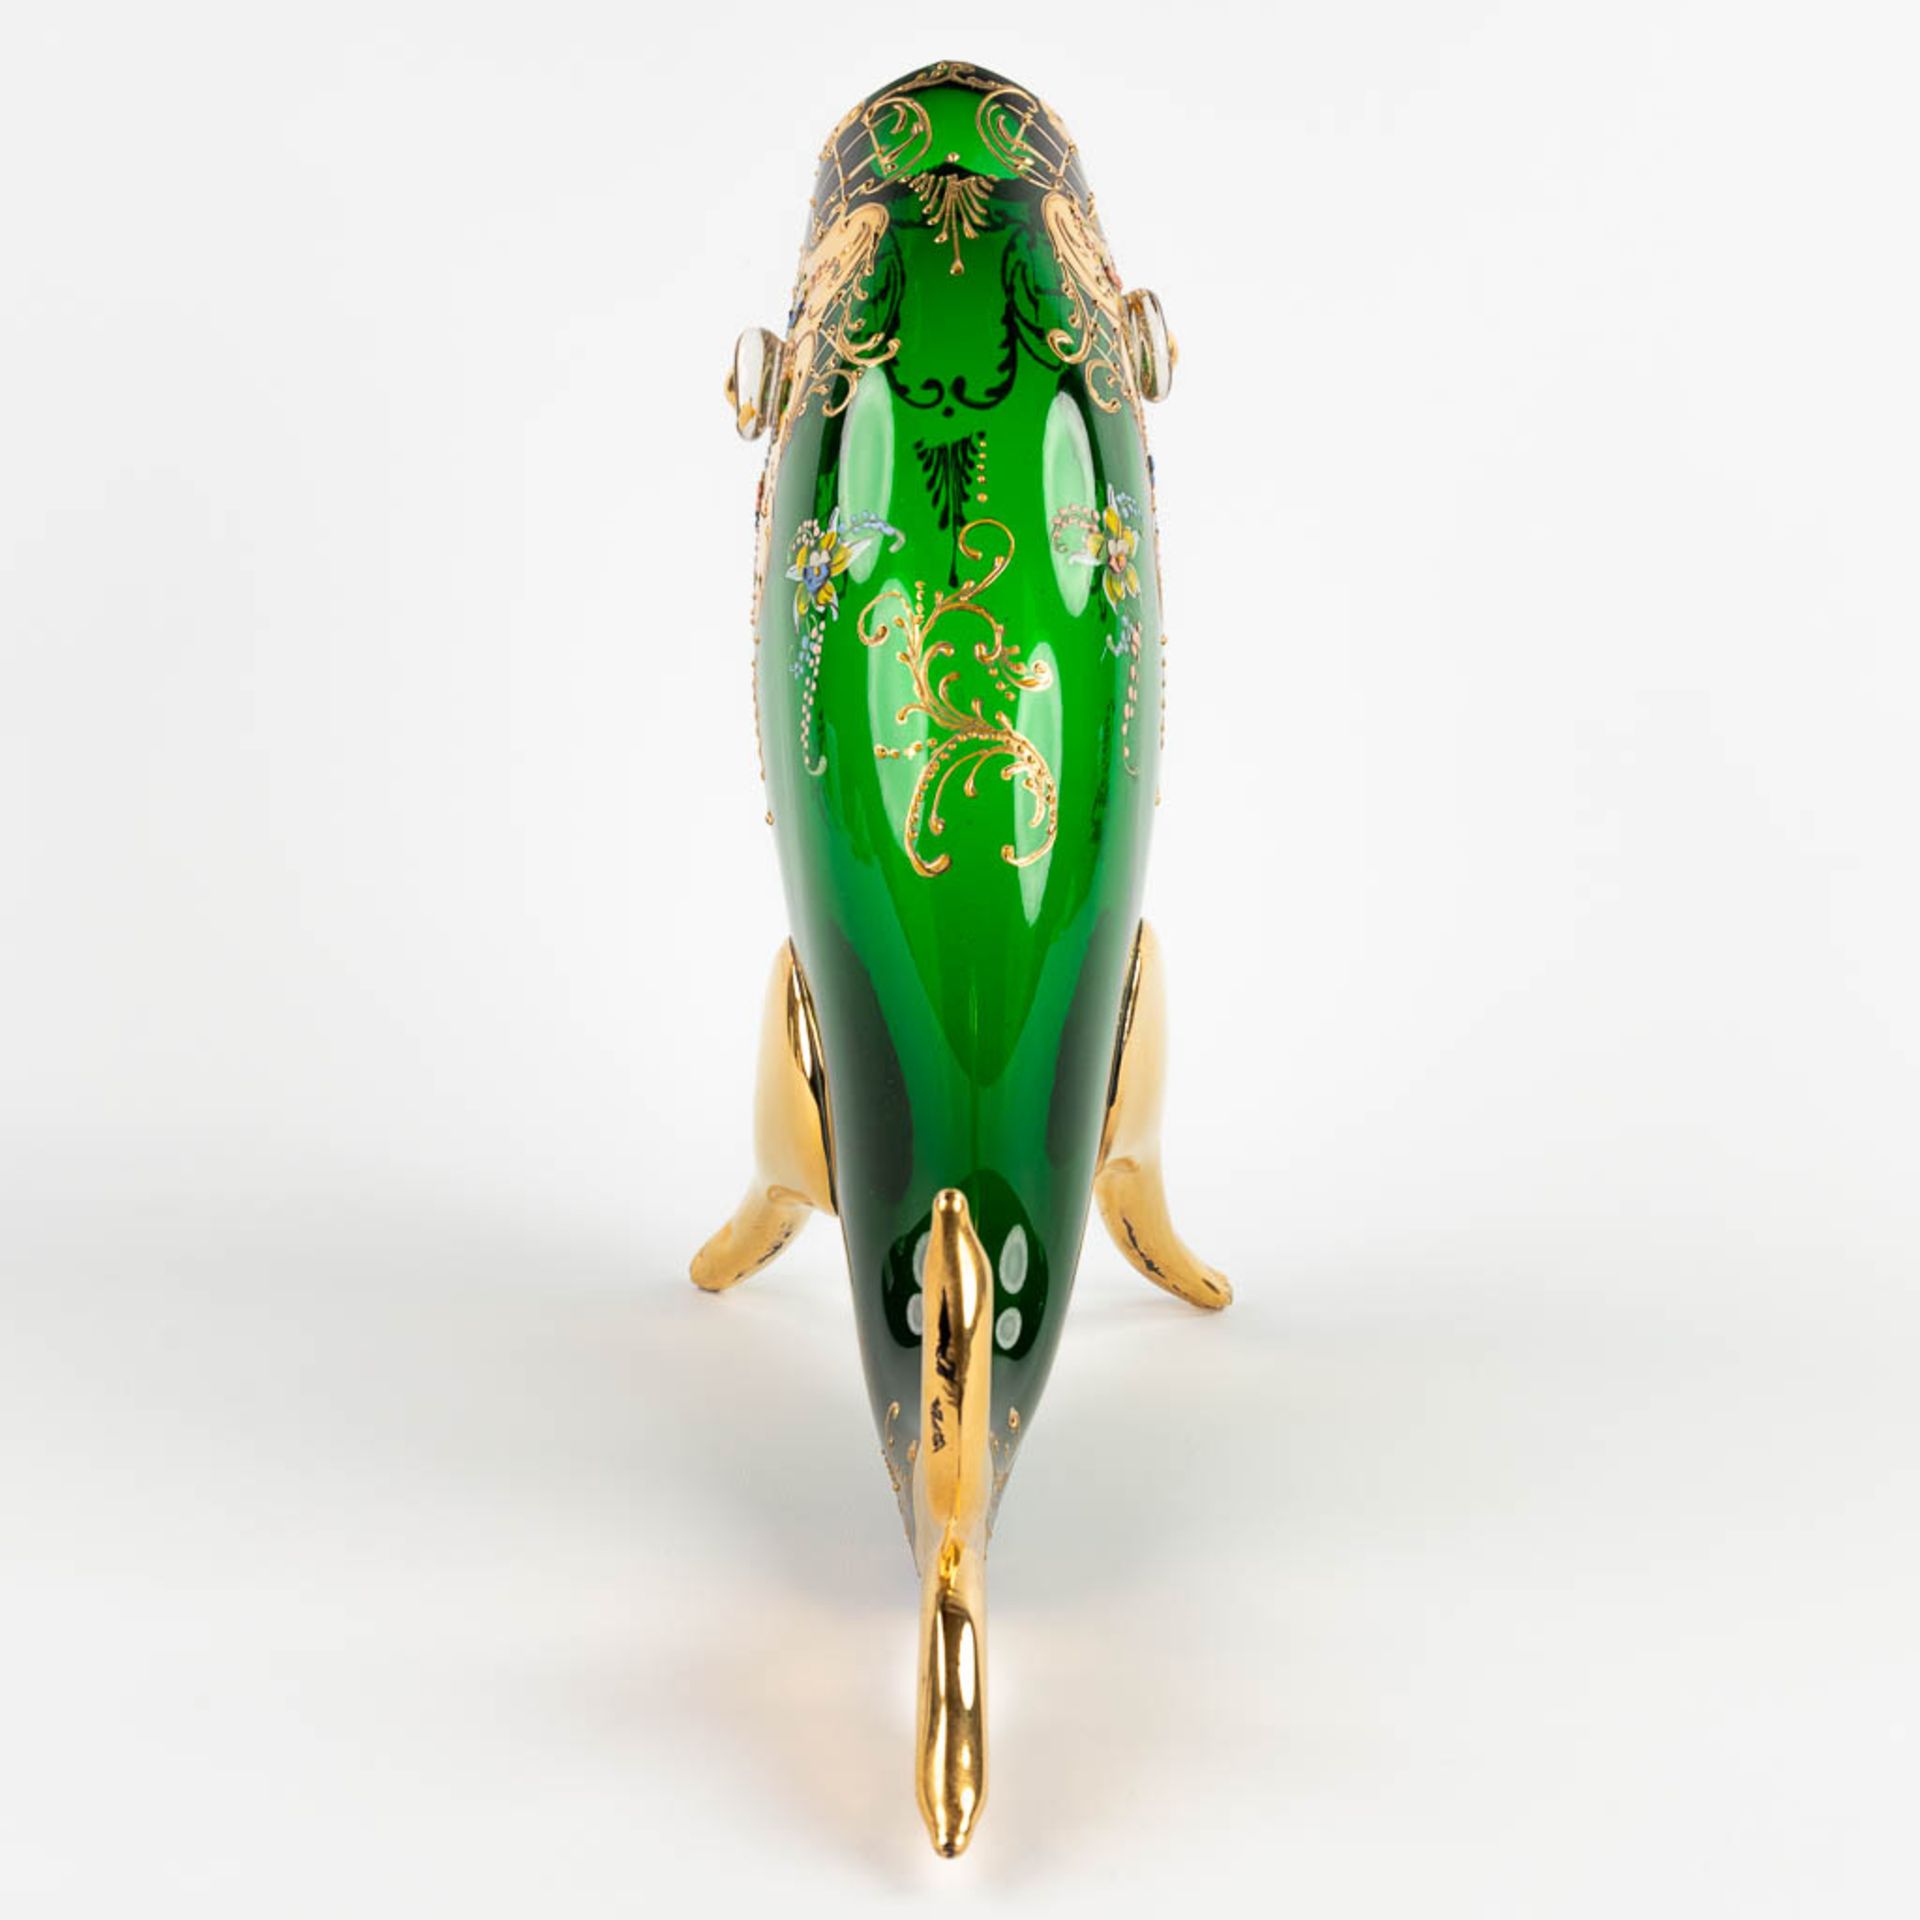 A fish and a vase, art glass, Murano, Italy. (H:44 x D:15 cm) - Image 16 of 21